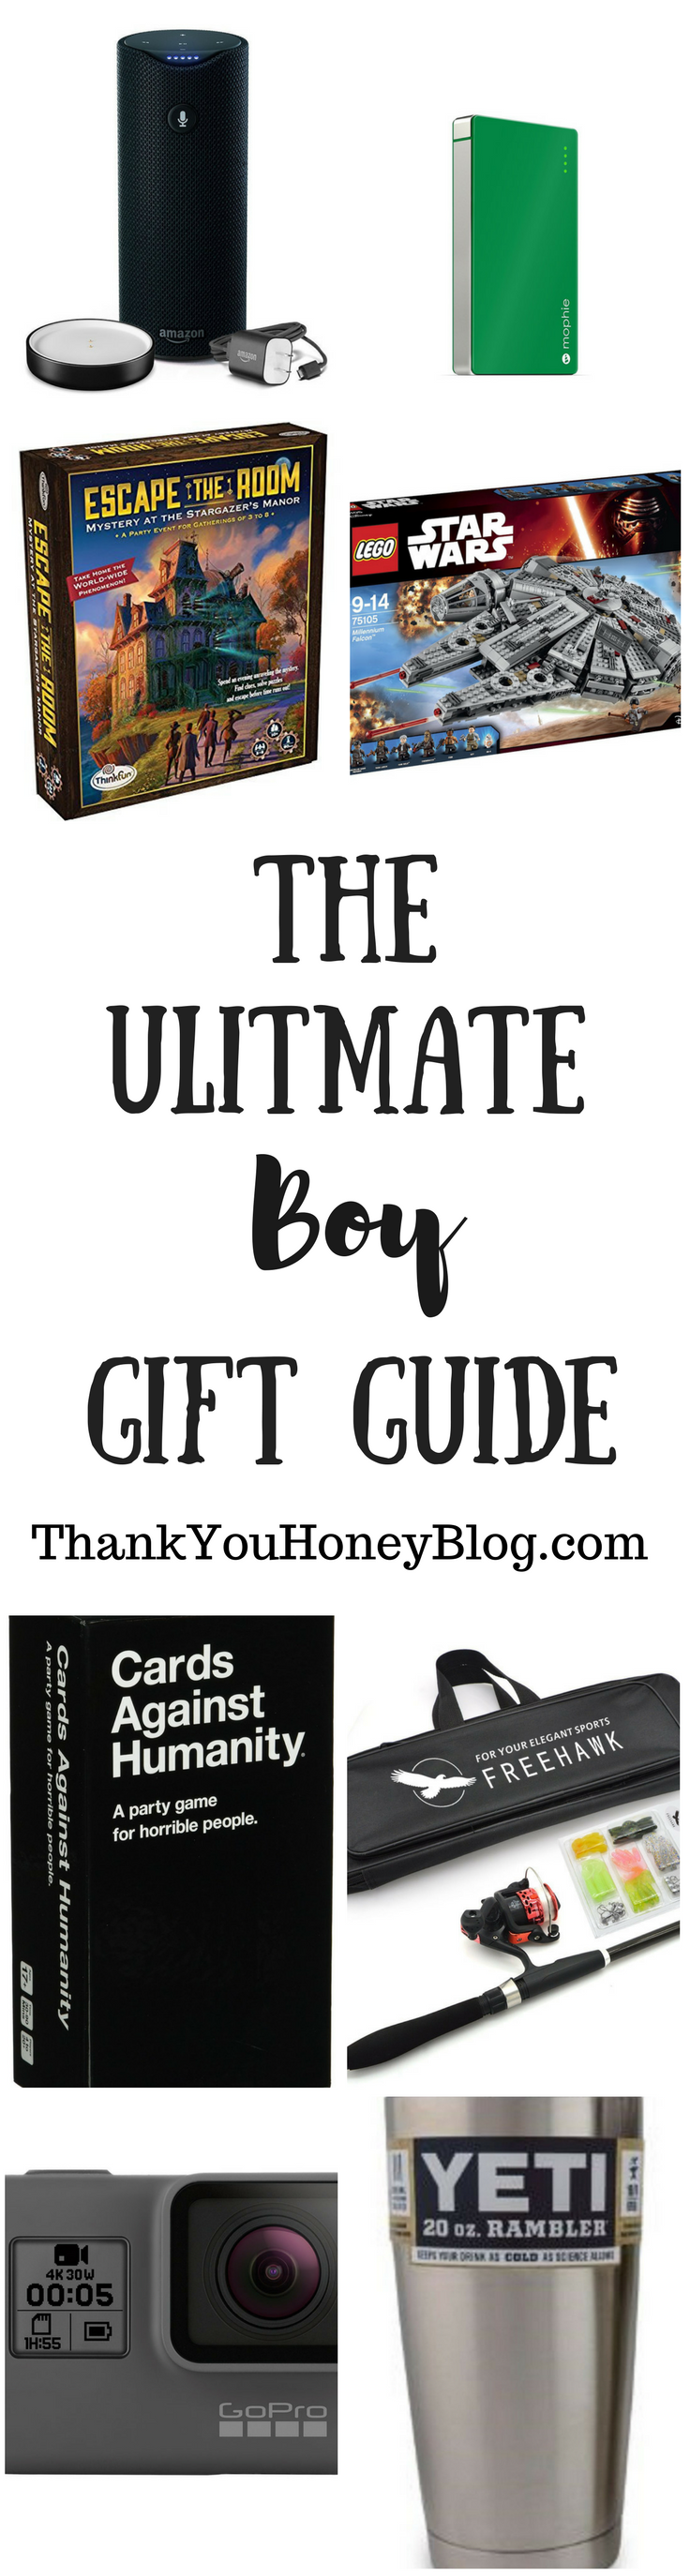 The Ultimate Boy Gift Guide